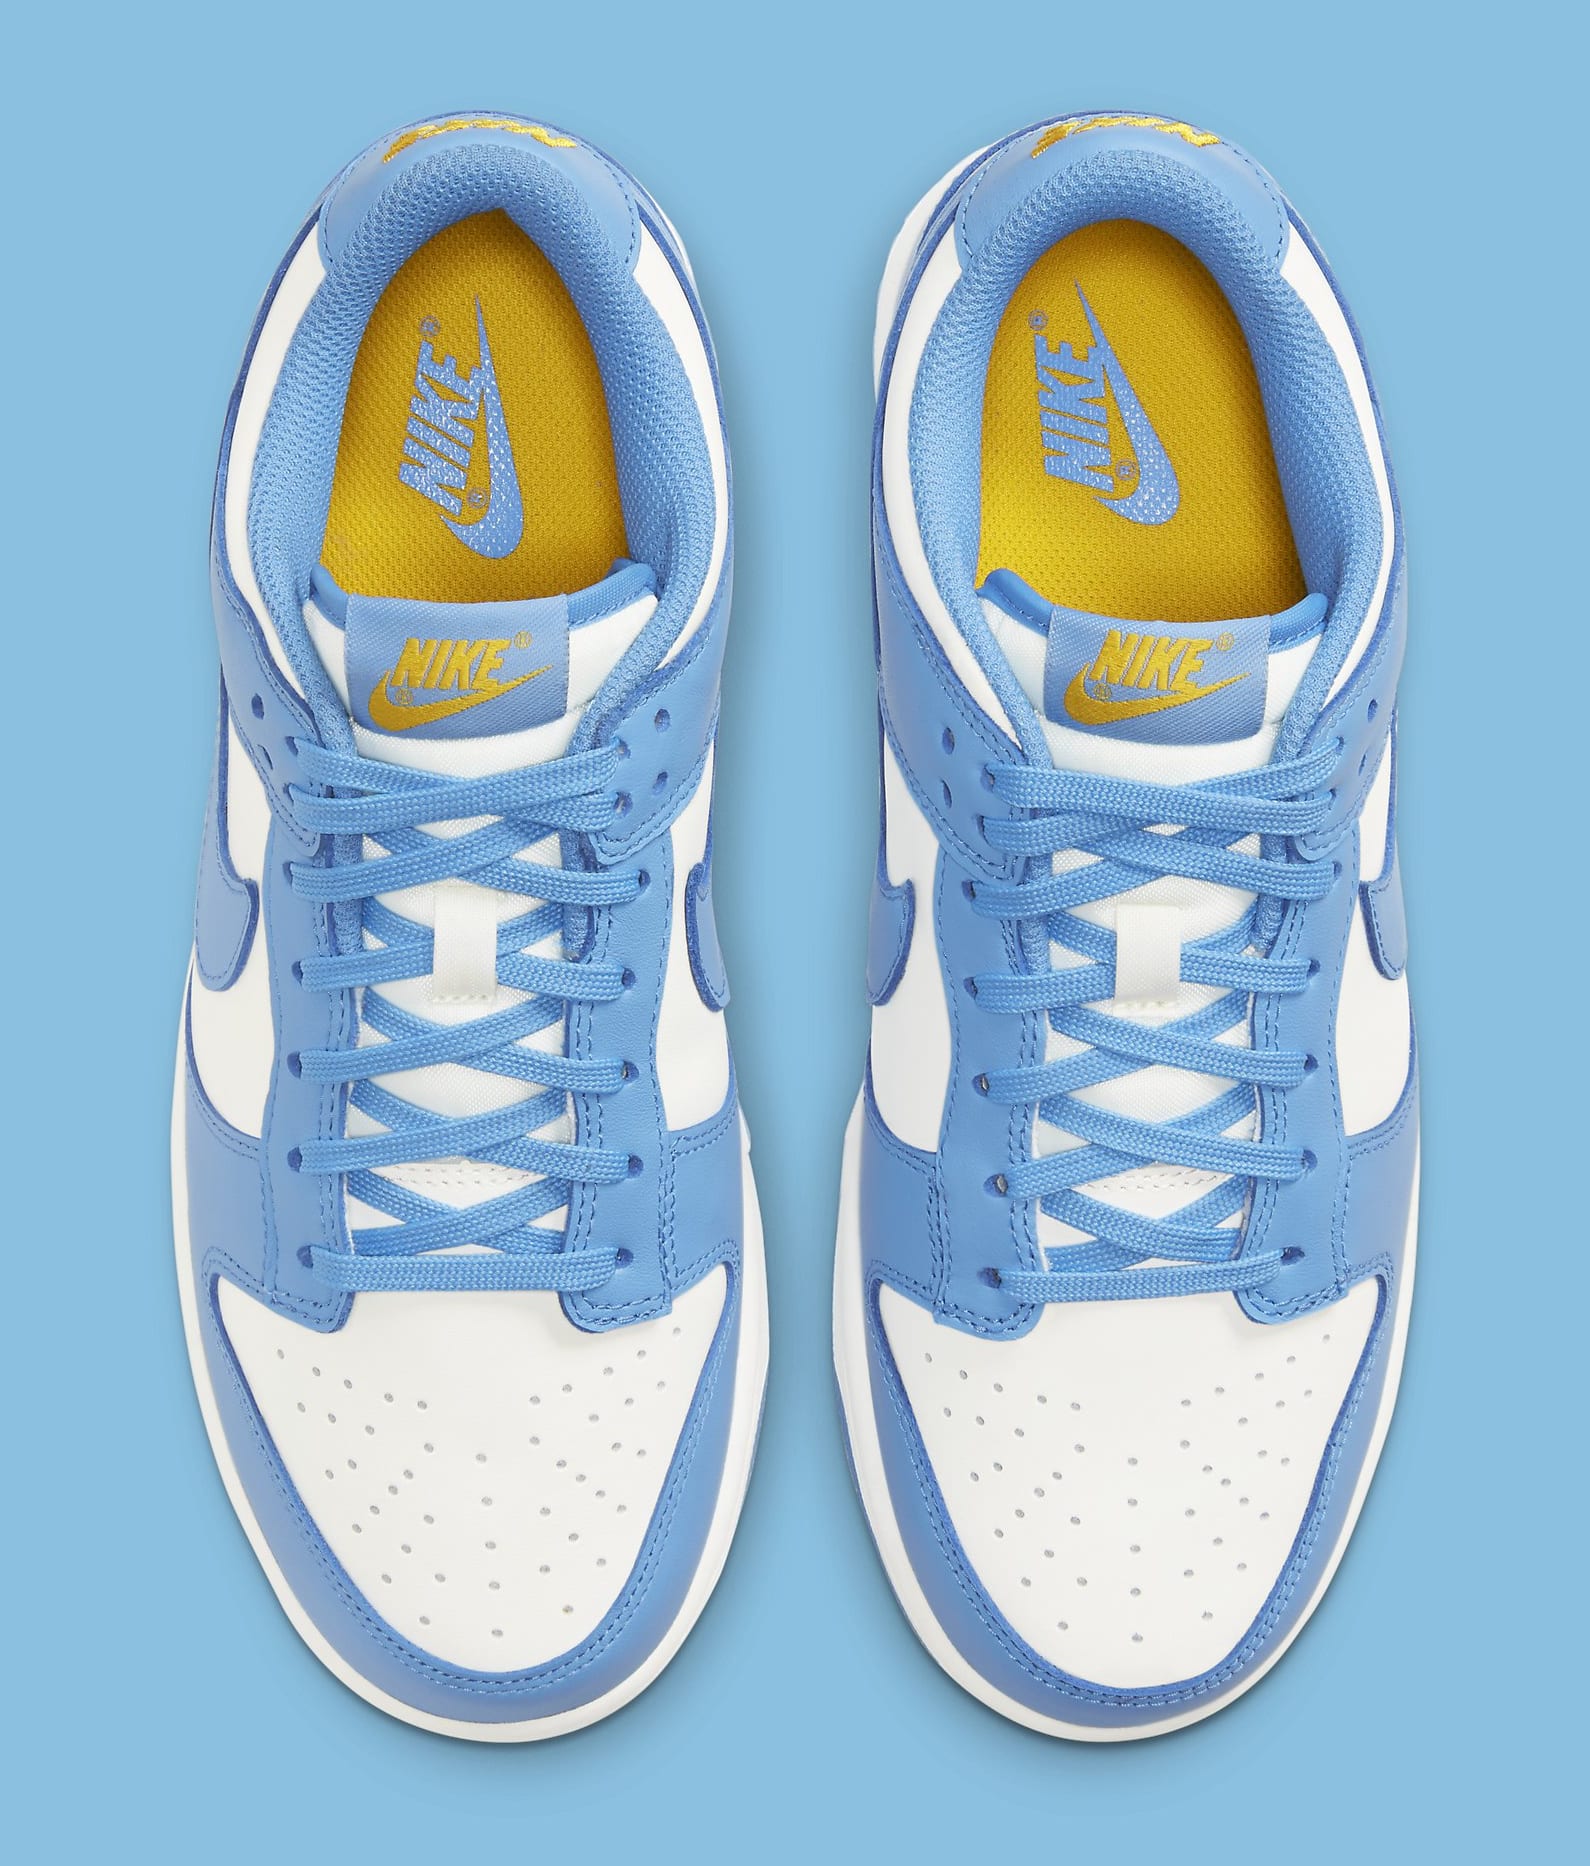 Detailed Look at the 'Coast' Nike Dunk Lows This women's exclusive ...